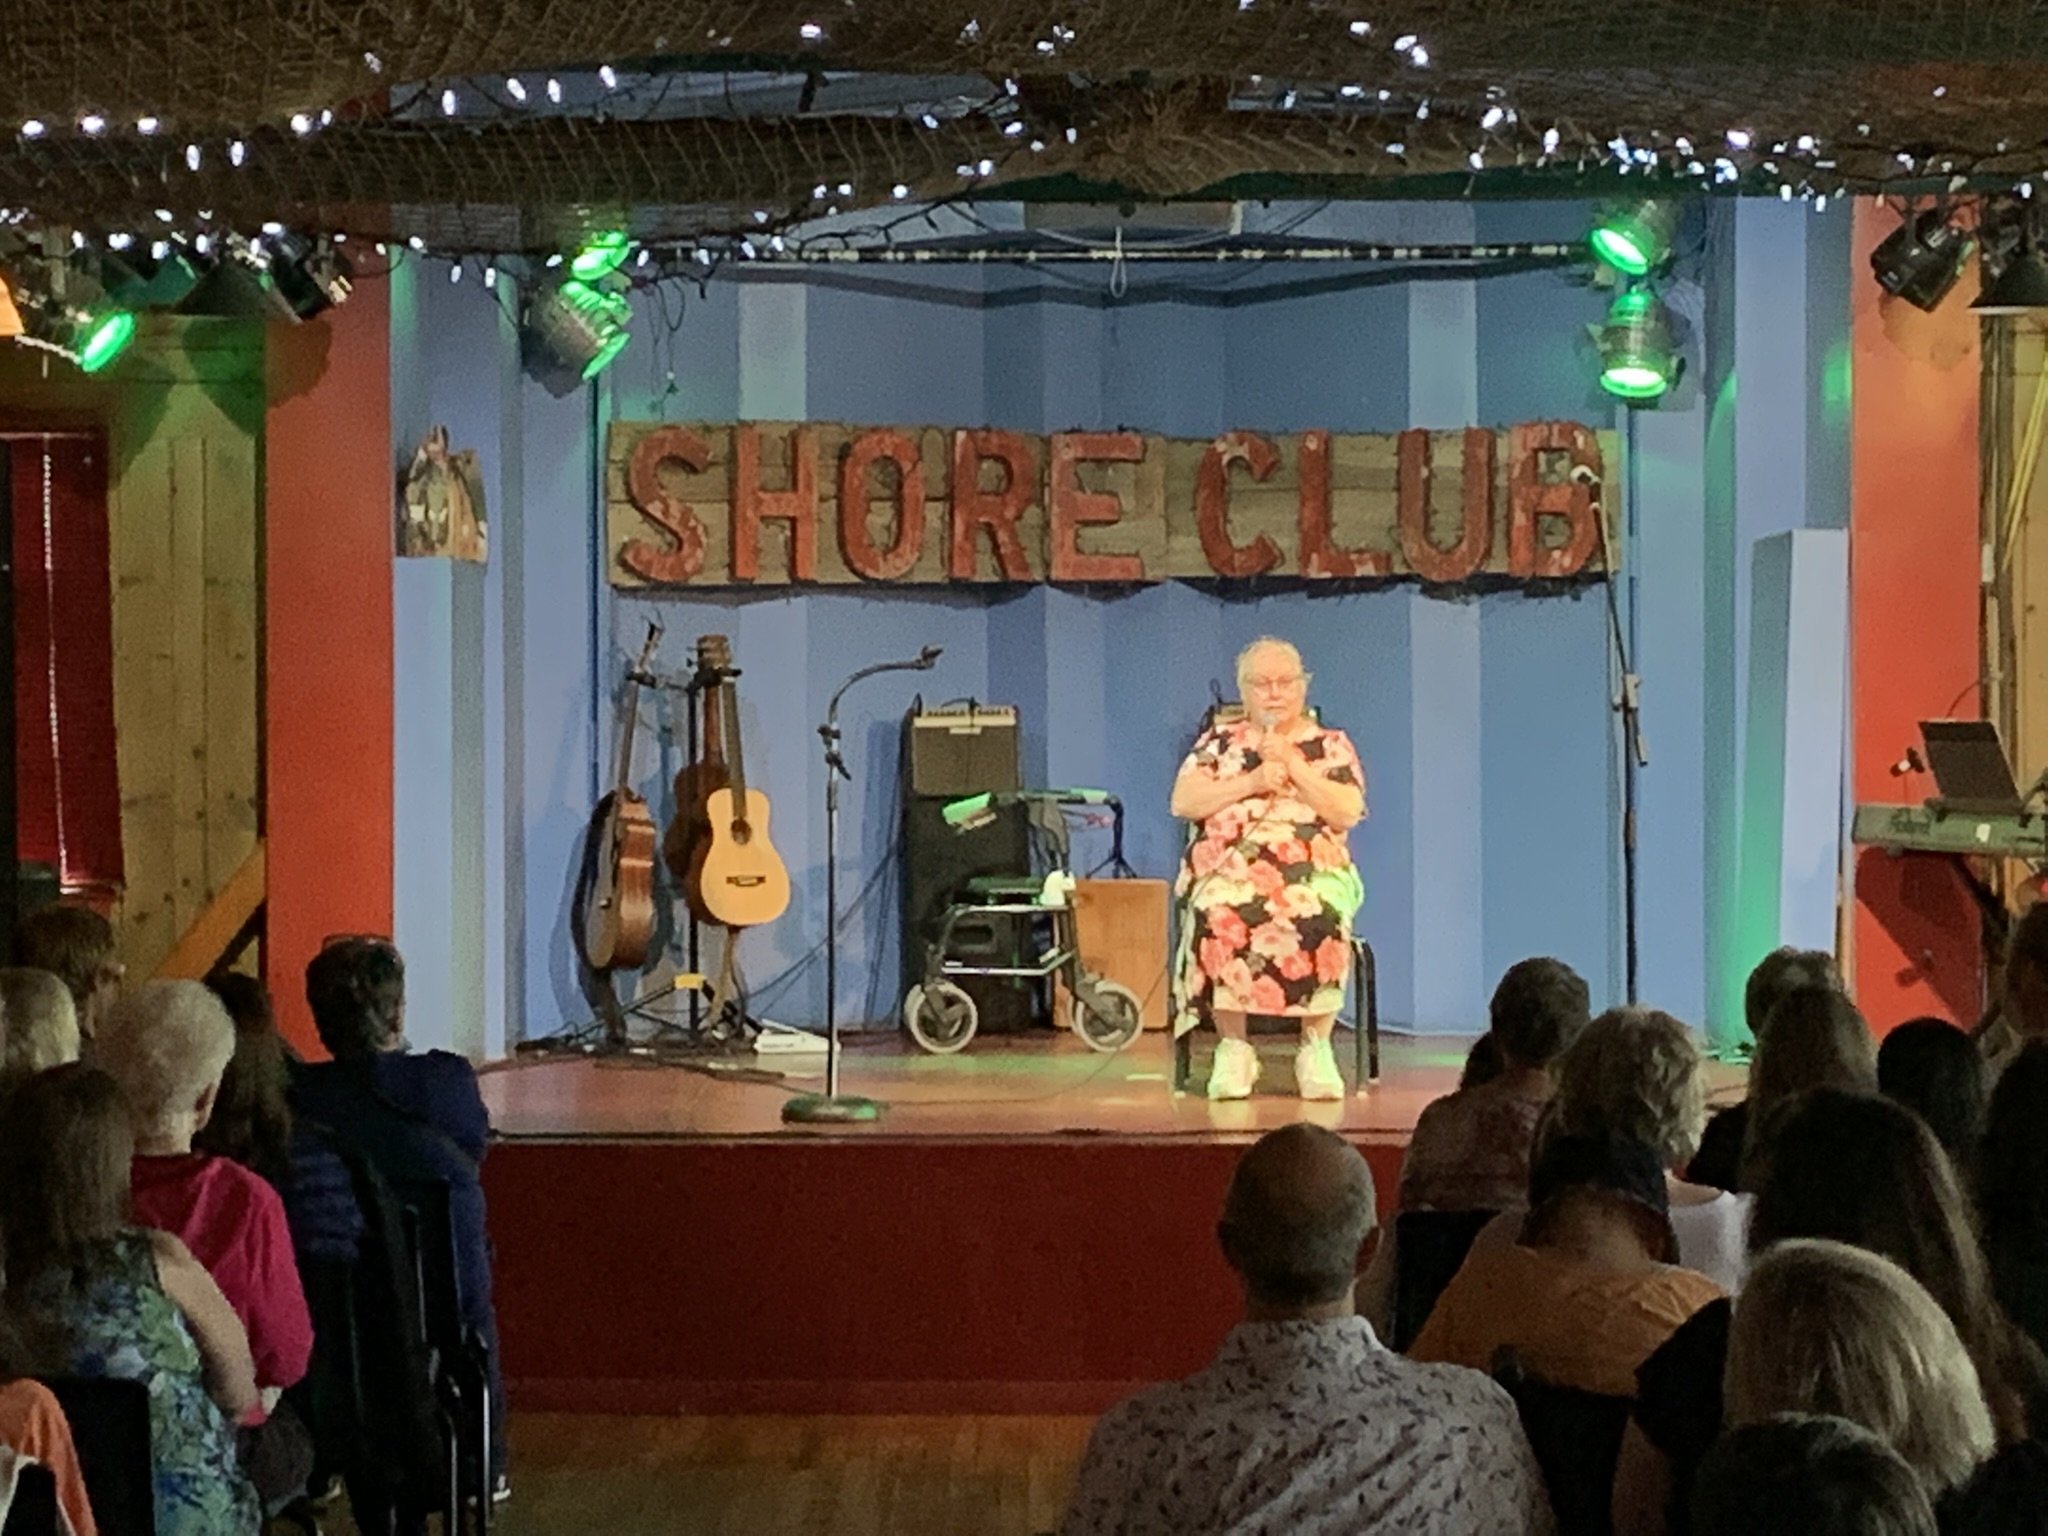 On Tuesday August 2nd, 2022, St. Luke's 74th Variety Show was held at the Shore Club.